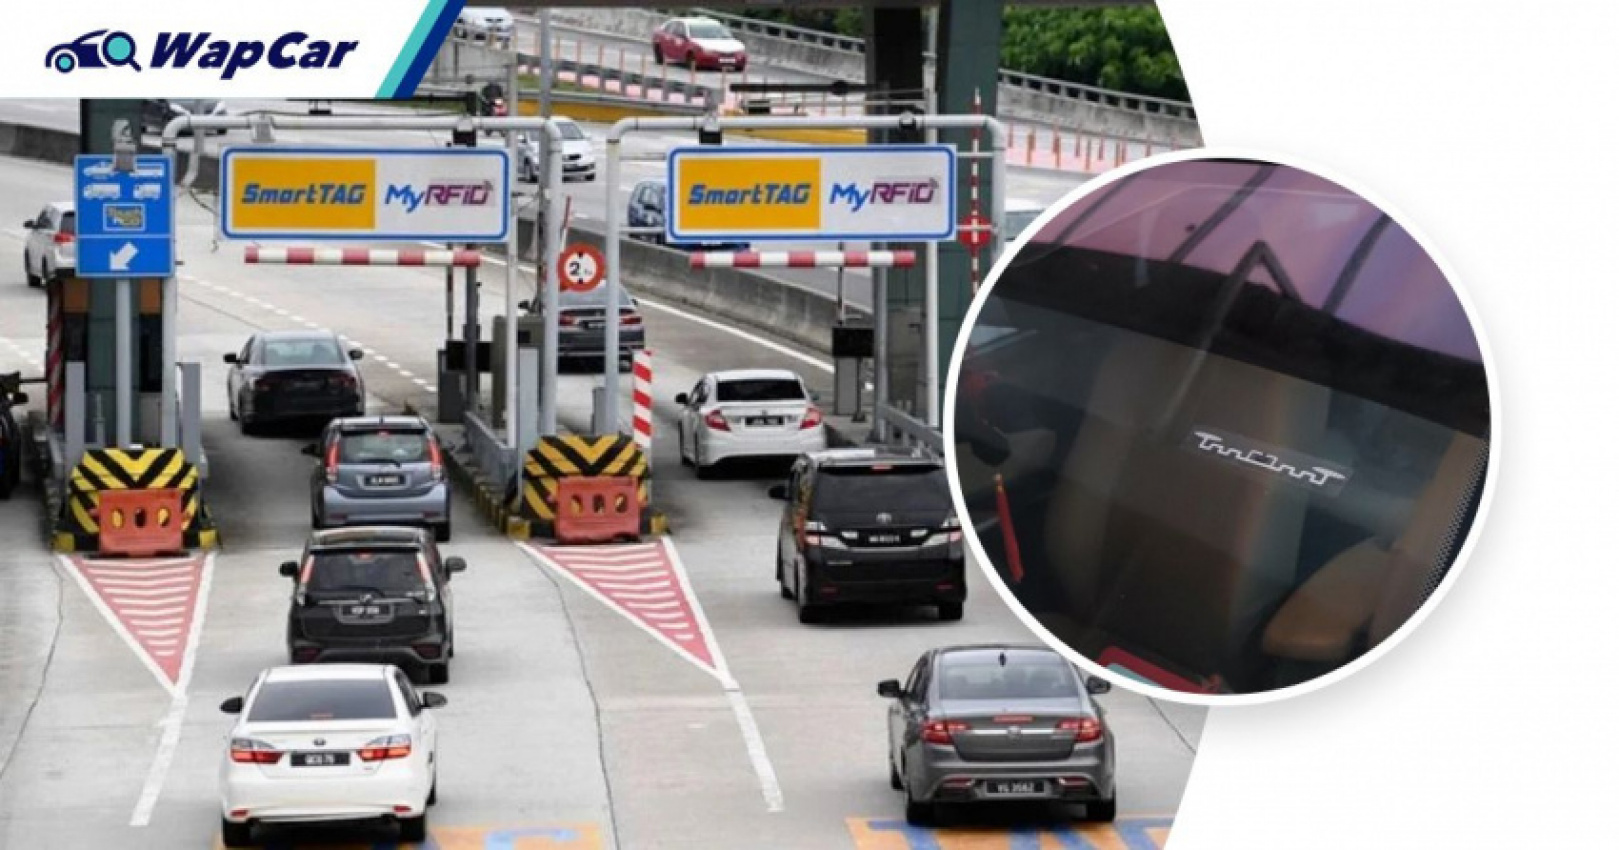 autos, cars, mini, works ministry to plus and tngo: justify charging rm 35 for rfid stickers